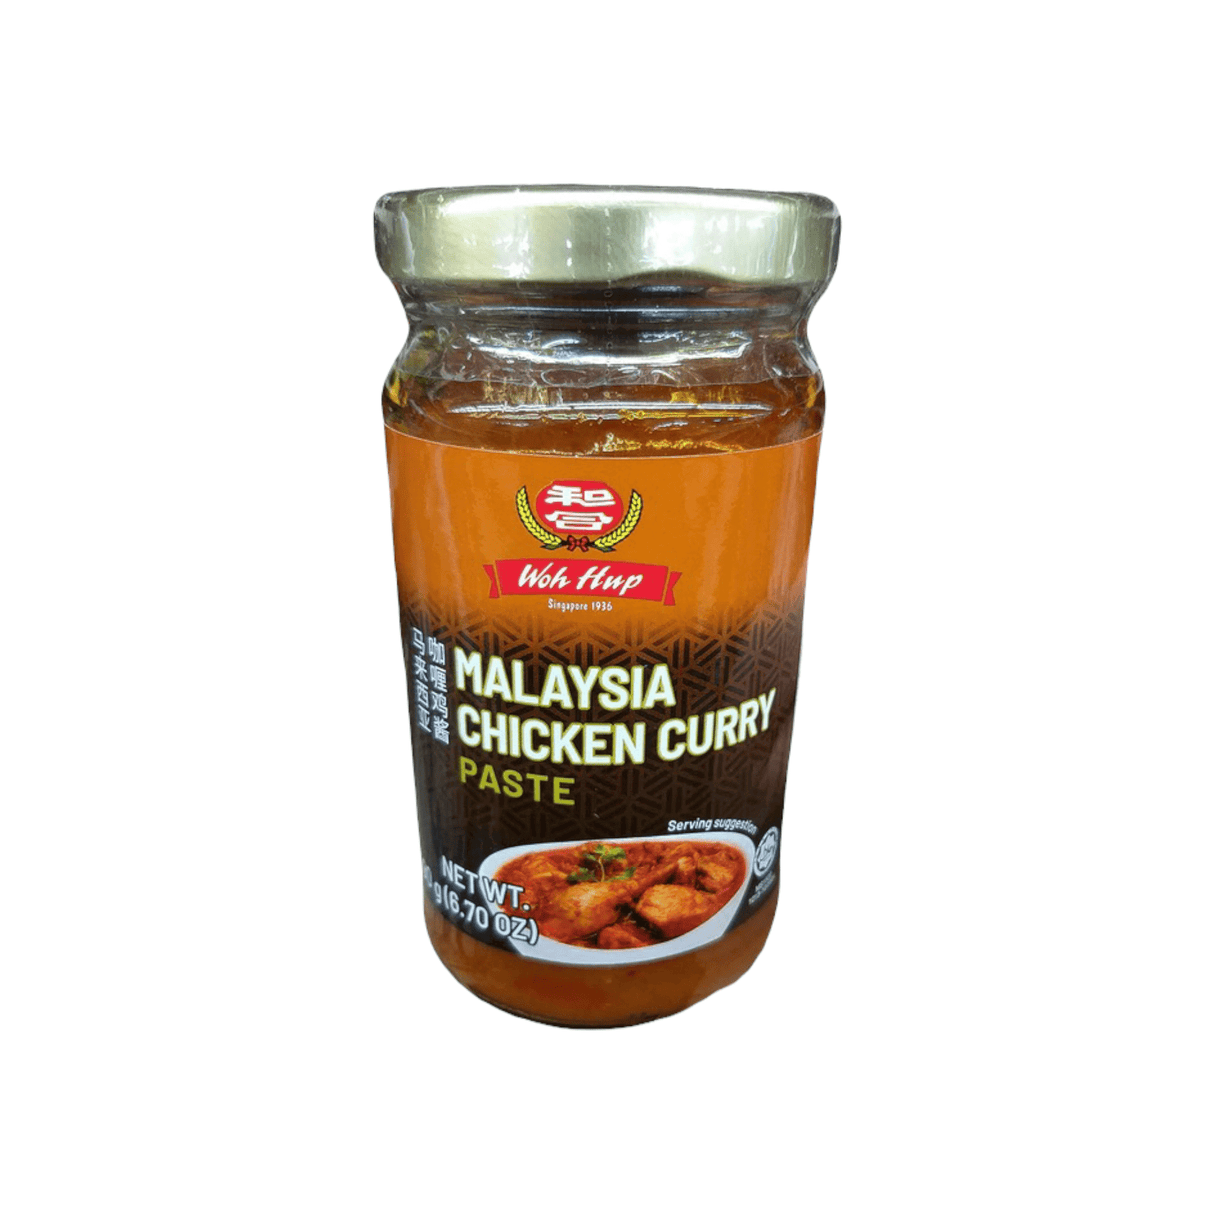 Woh Hup Malaysia Chicken Curry Paste